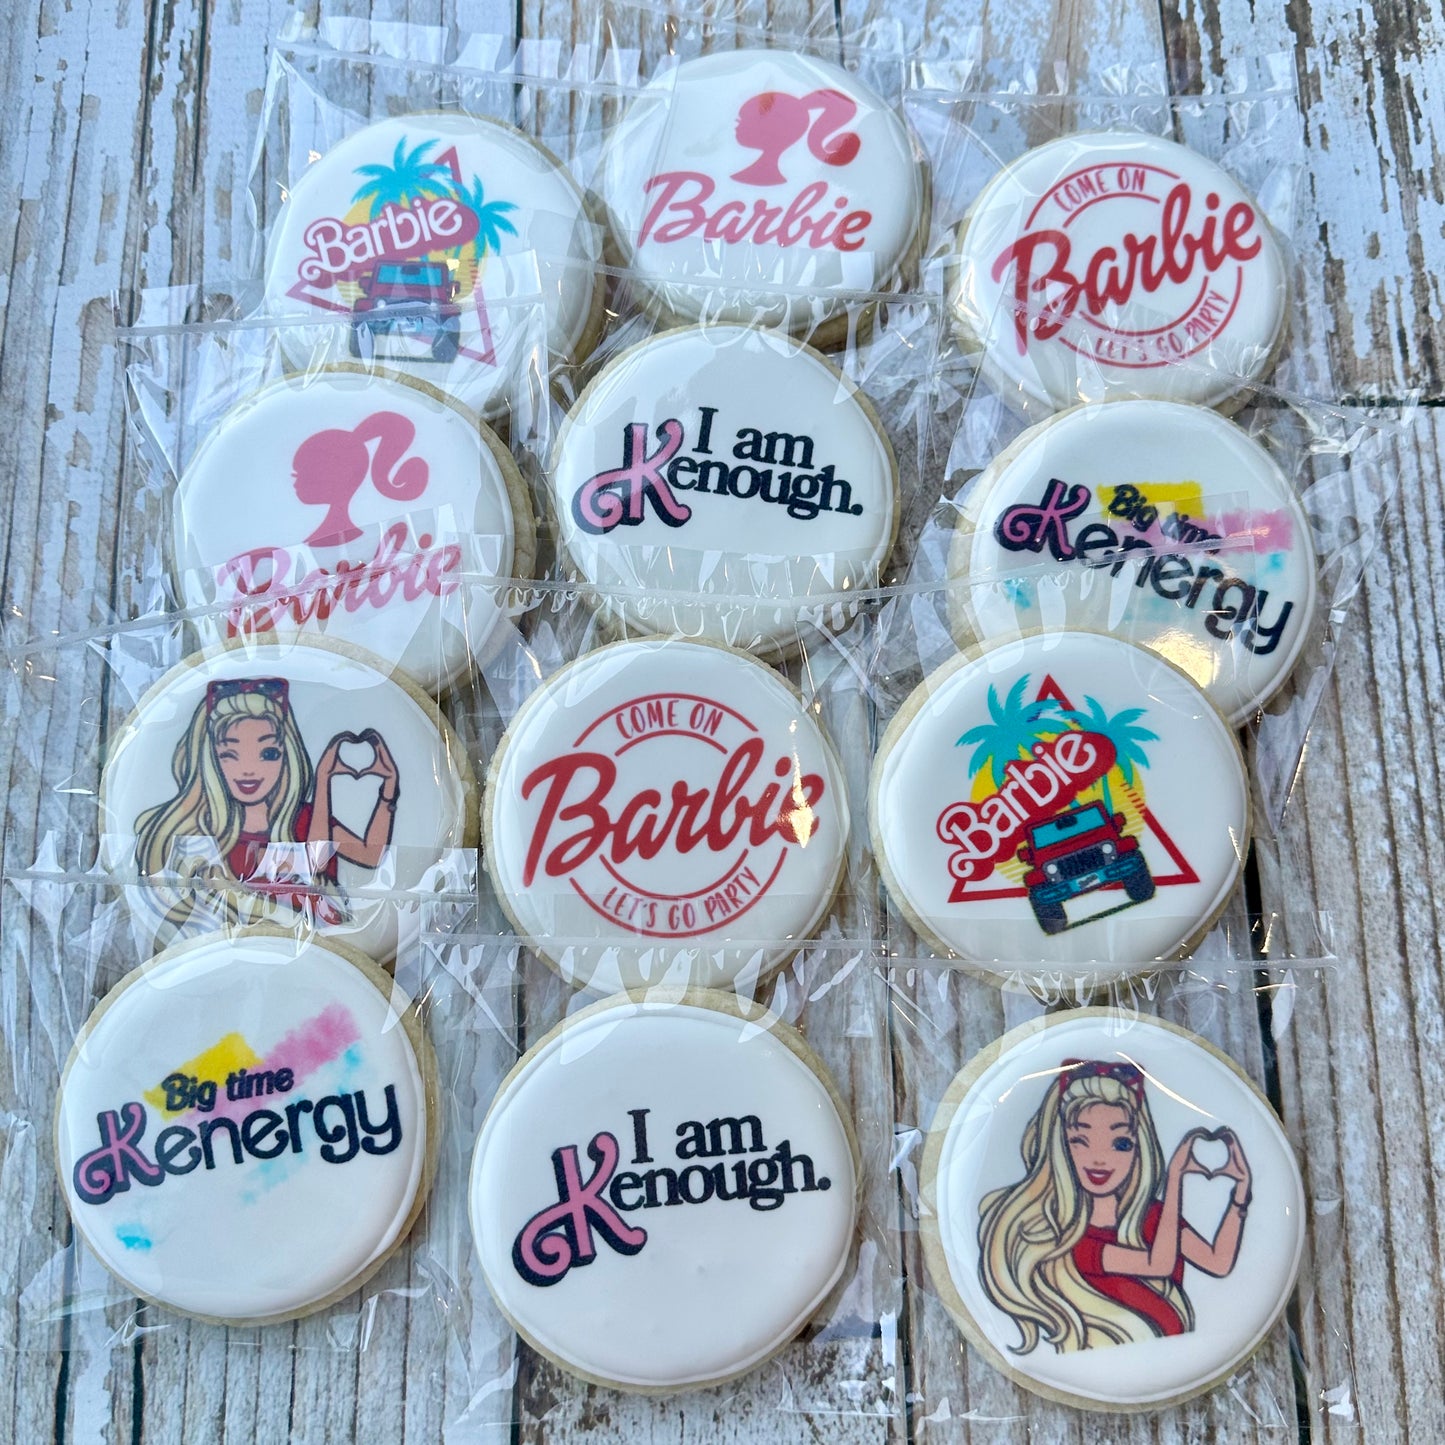 Barbie Pink Let's go Party Themed Cookies--12 Count